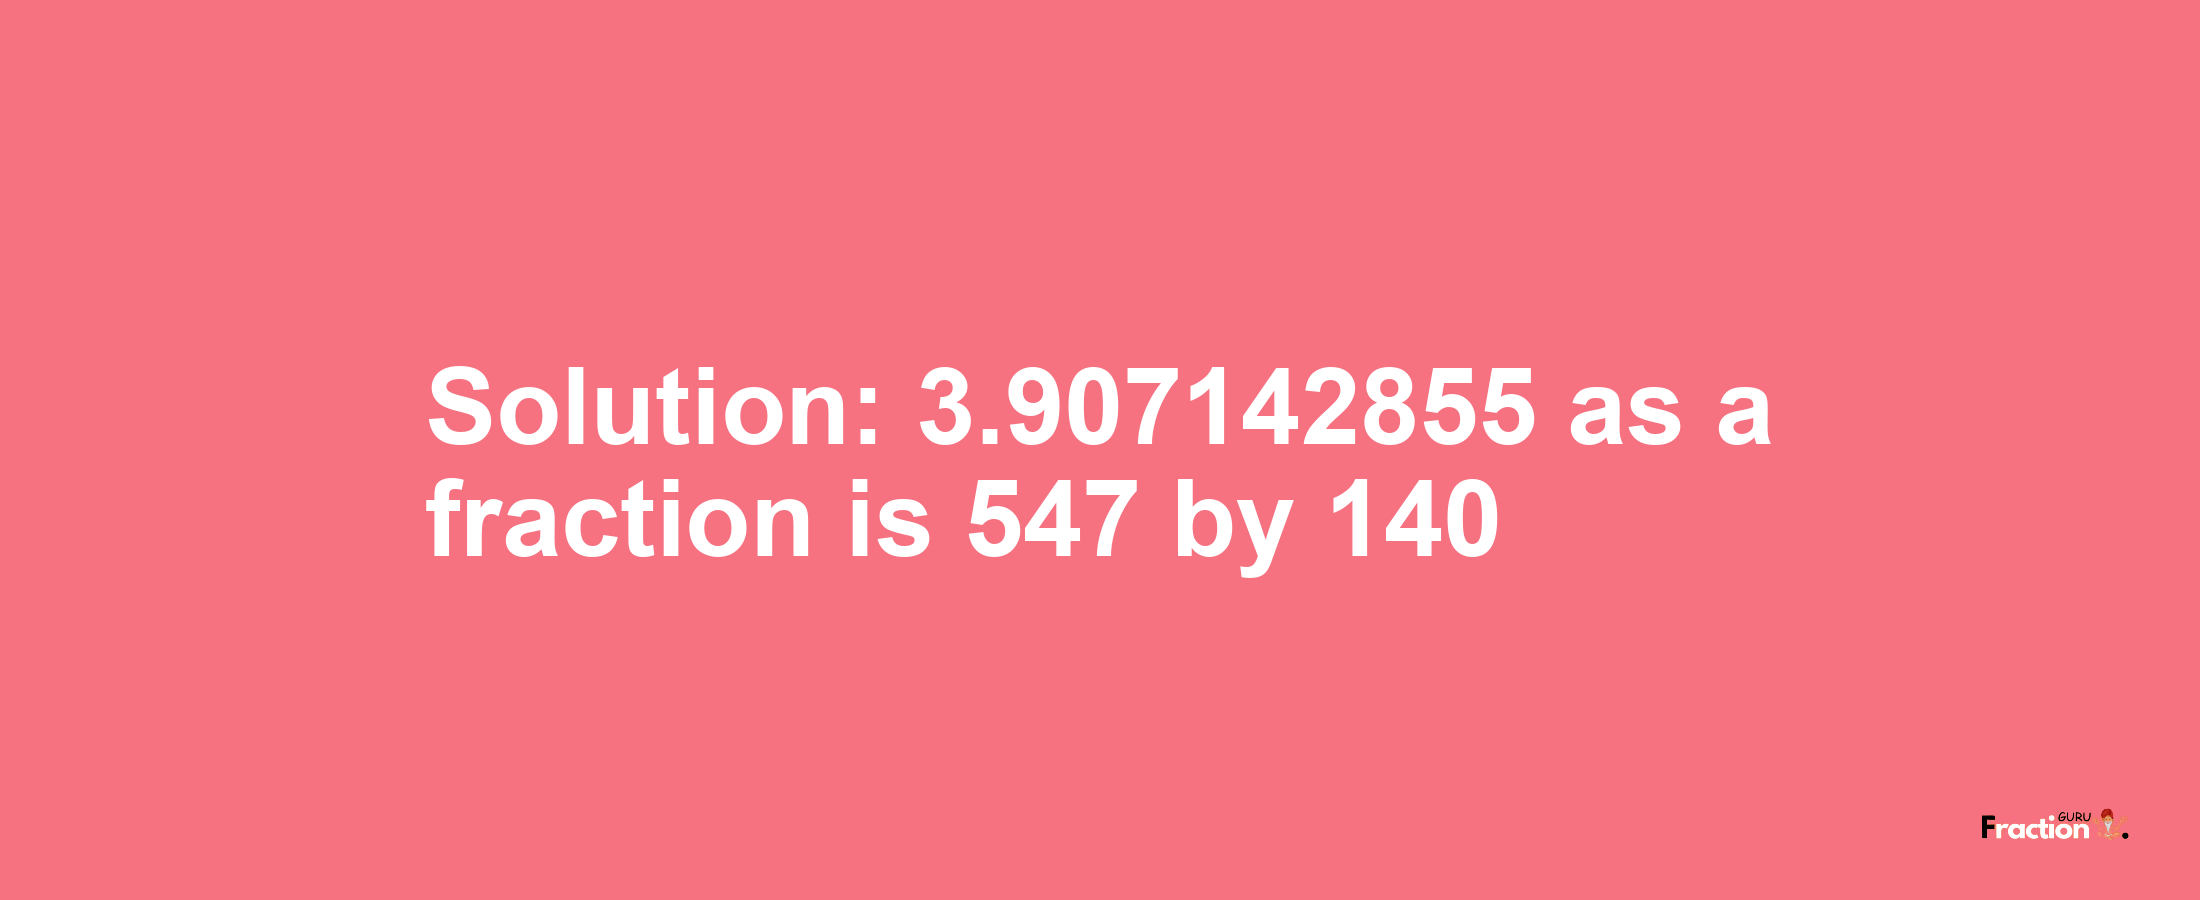 Solution:3.907142855 as a fraction is 547/140